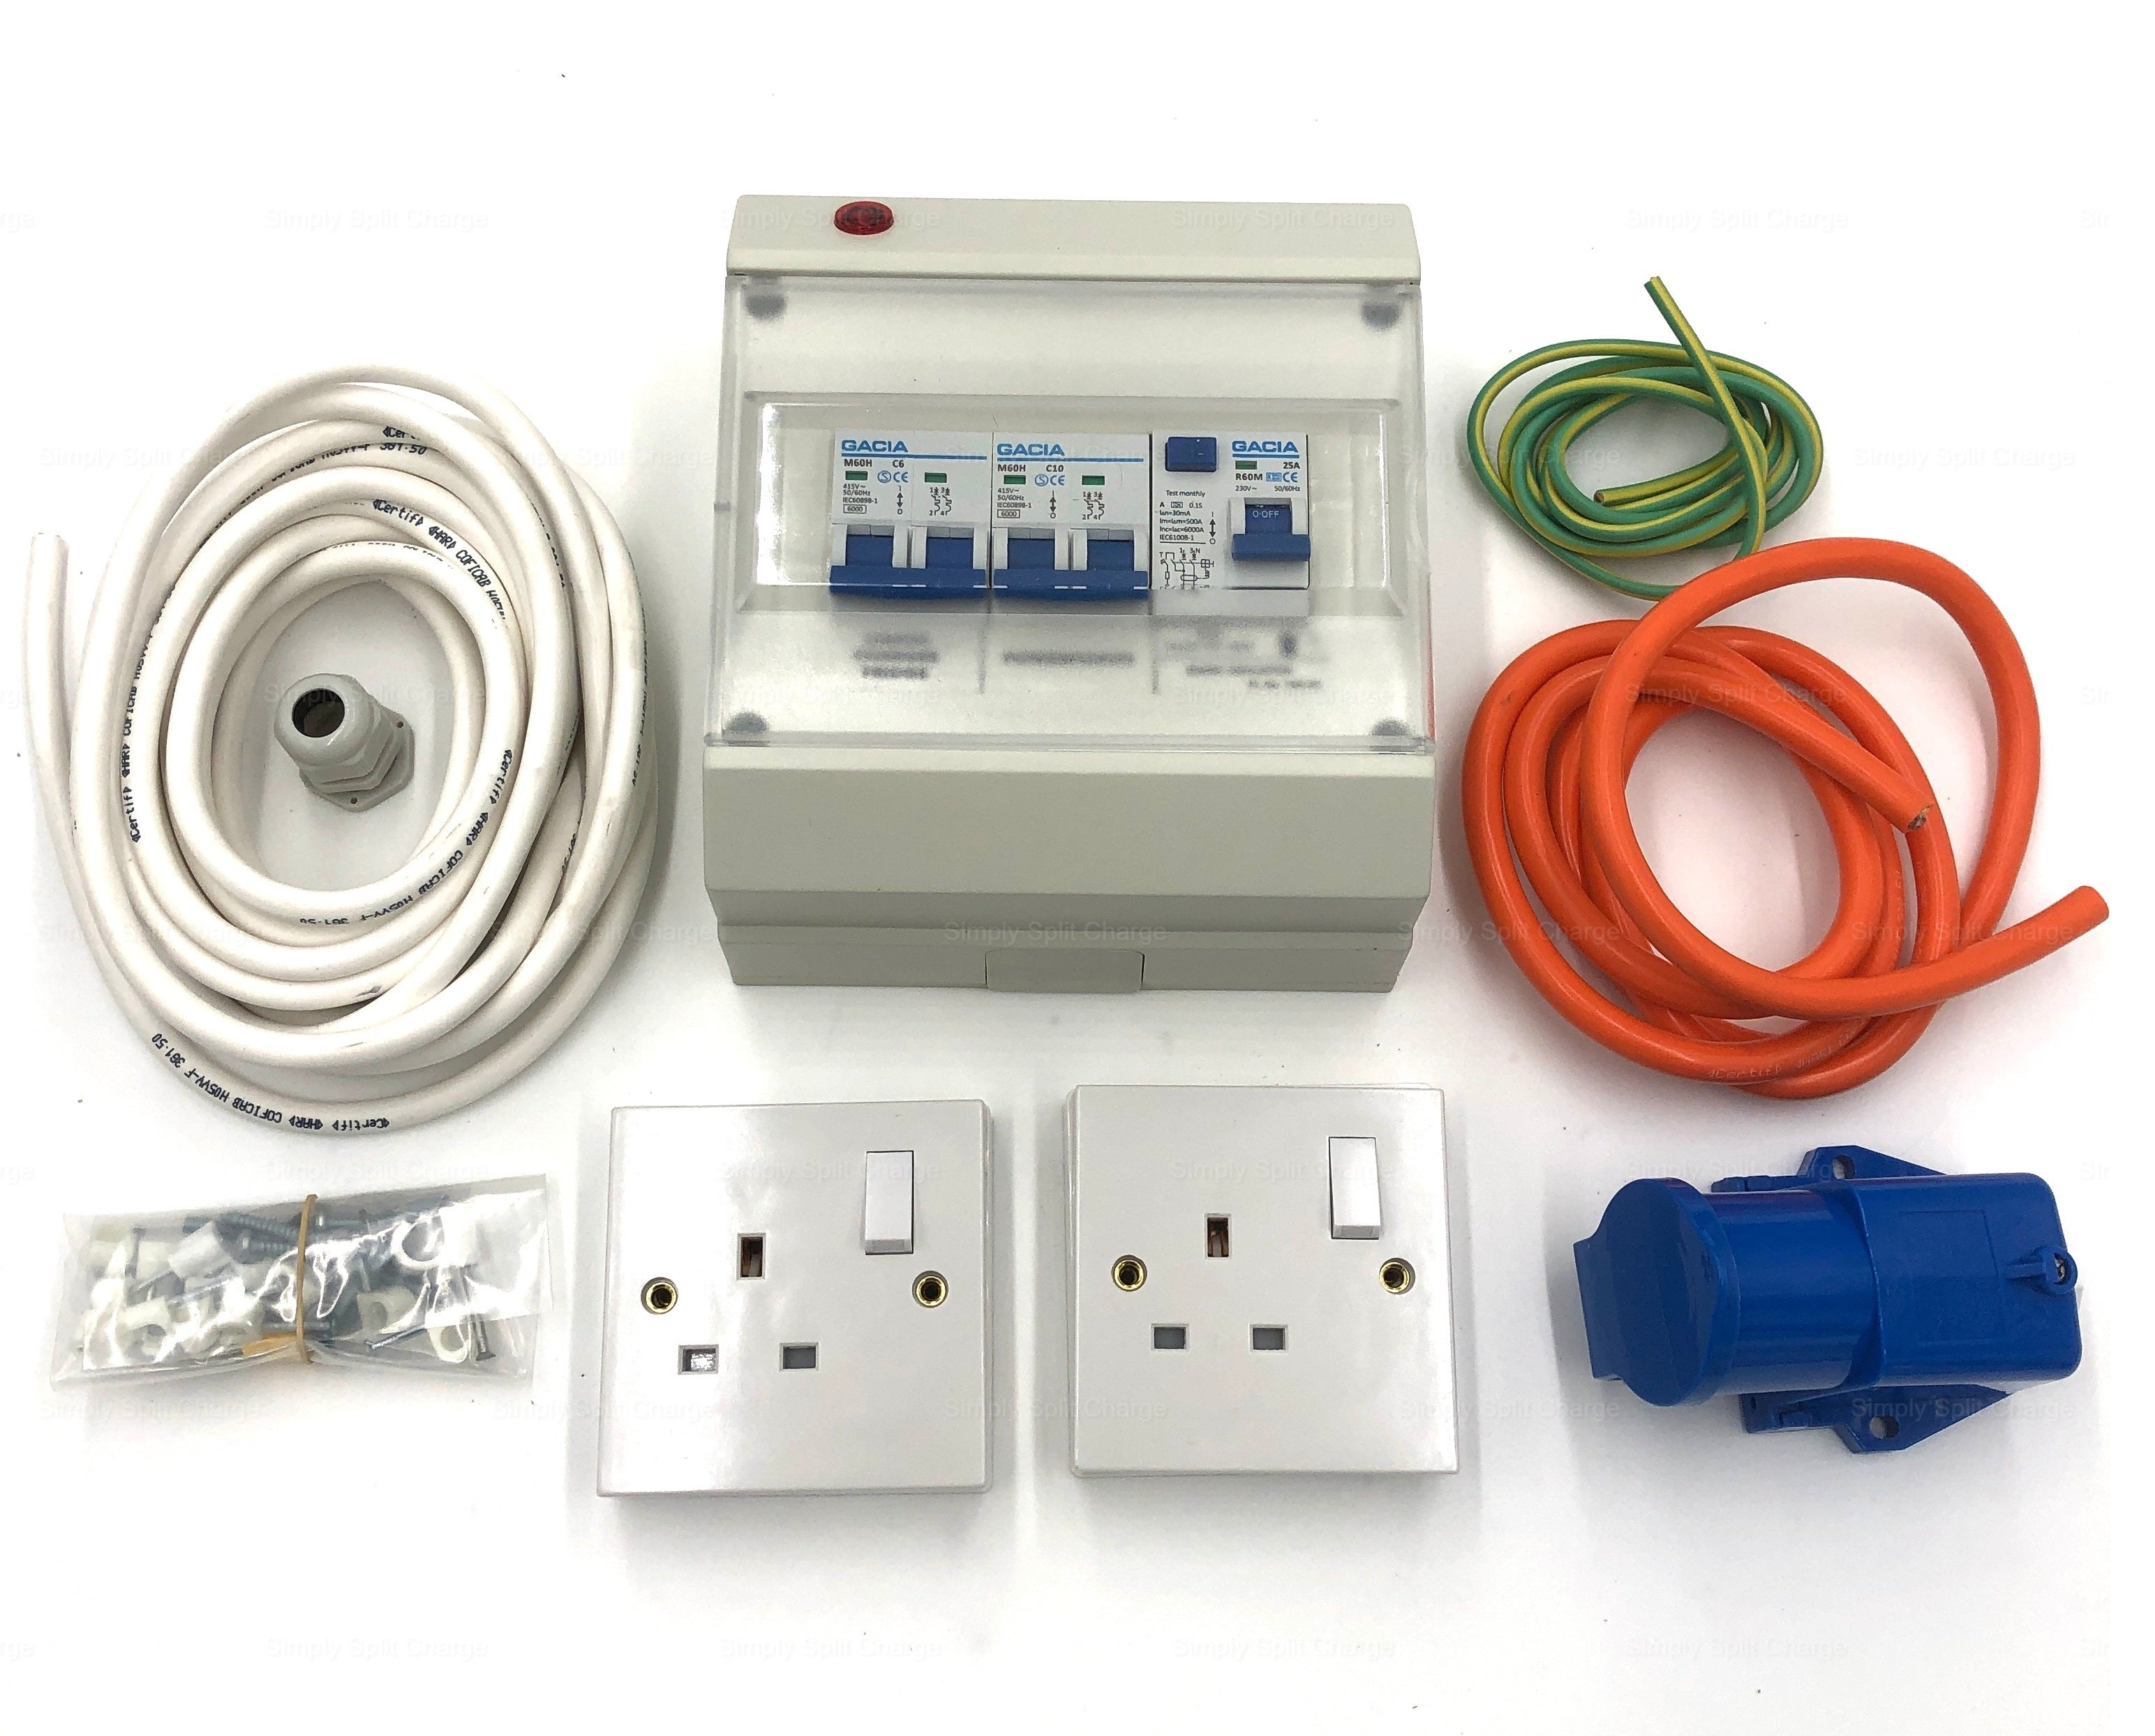 Campervan Electric Kit - Victron Non Isolated 30a DC-DC Charger + AC Charger, Hook Up, Fuse Box, Switch Panel, Battery Distribution